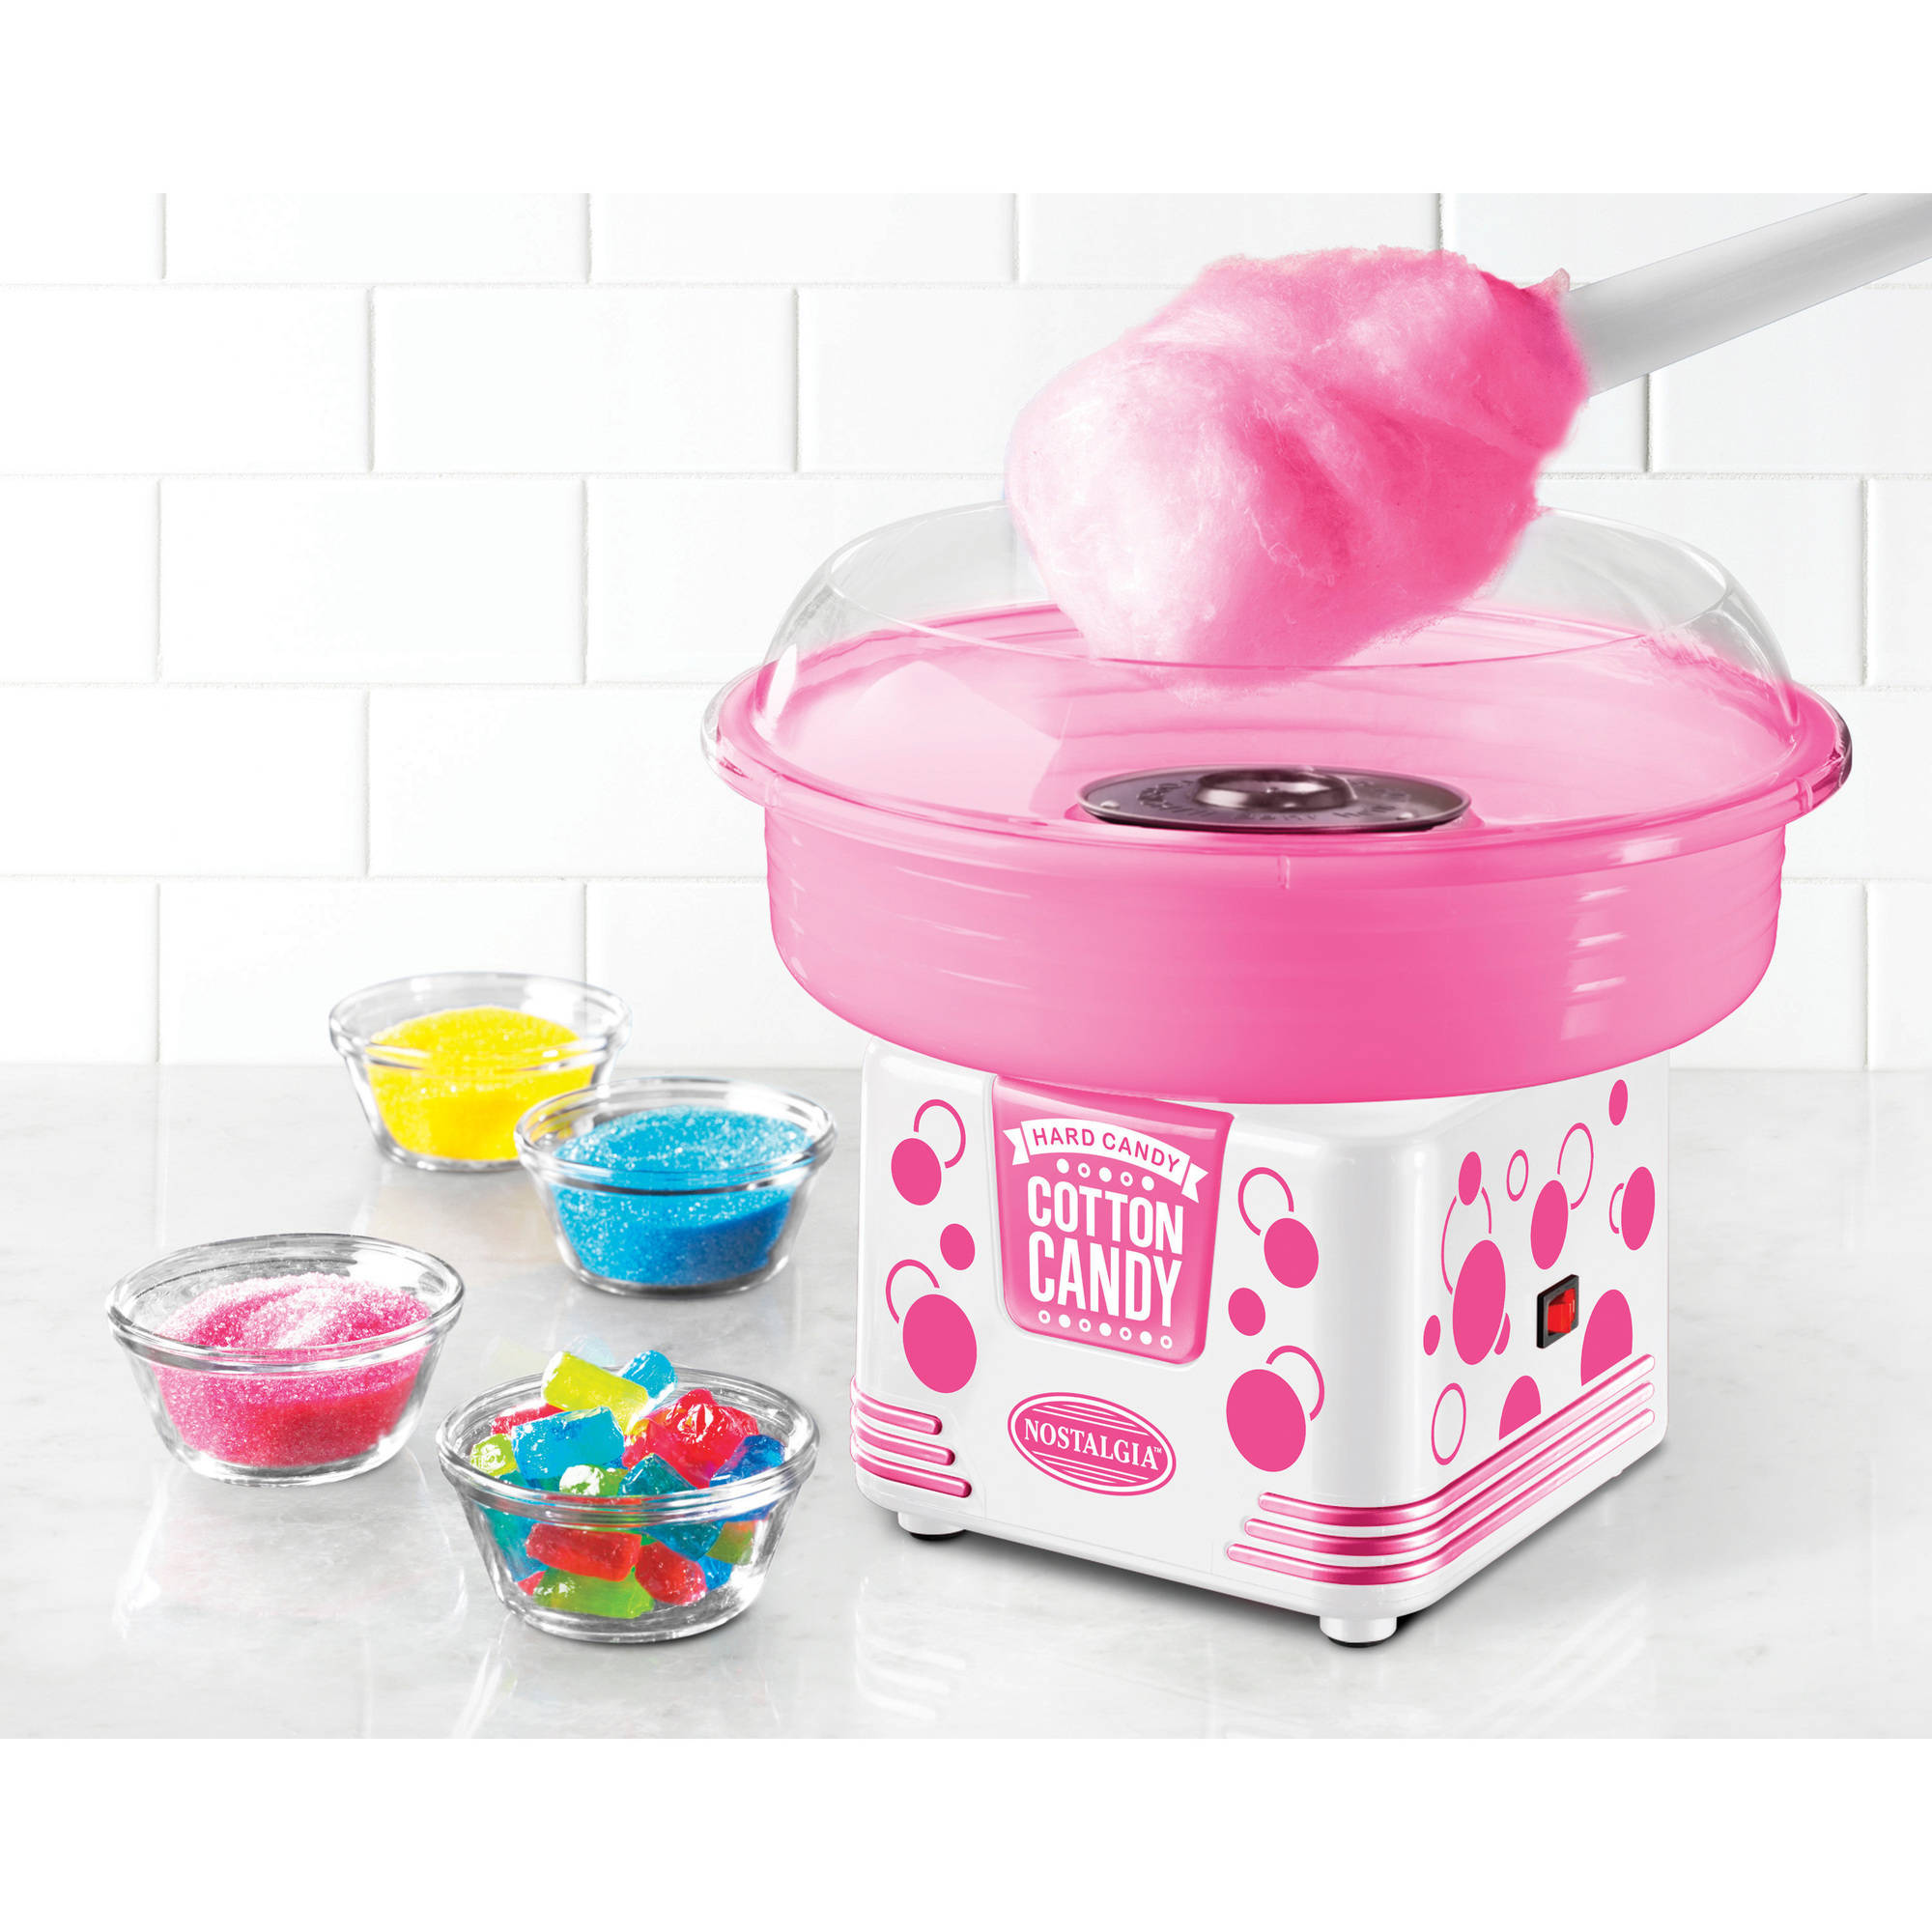 Nostalgia Cotton Candy Maker Only $27.99!